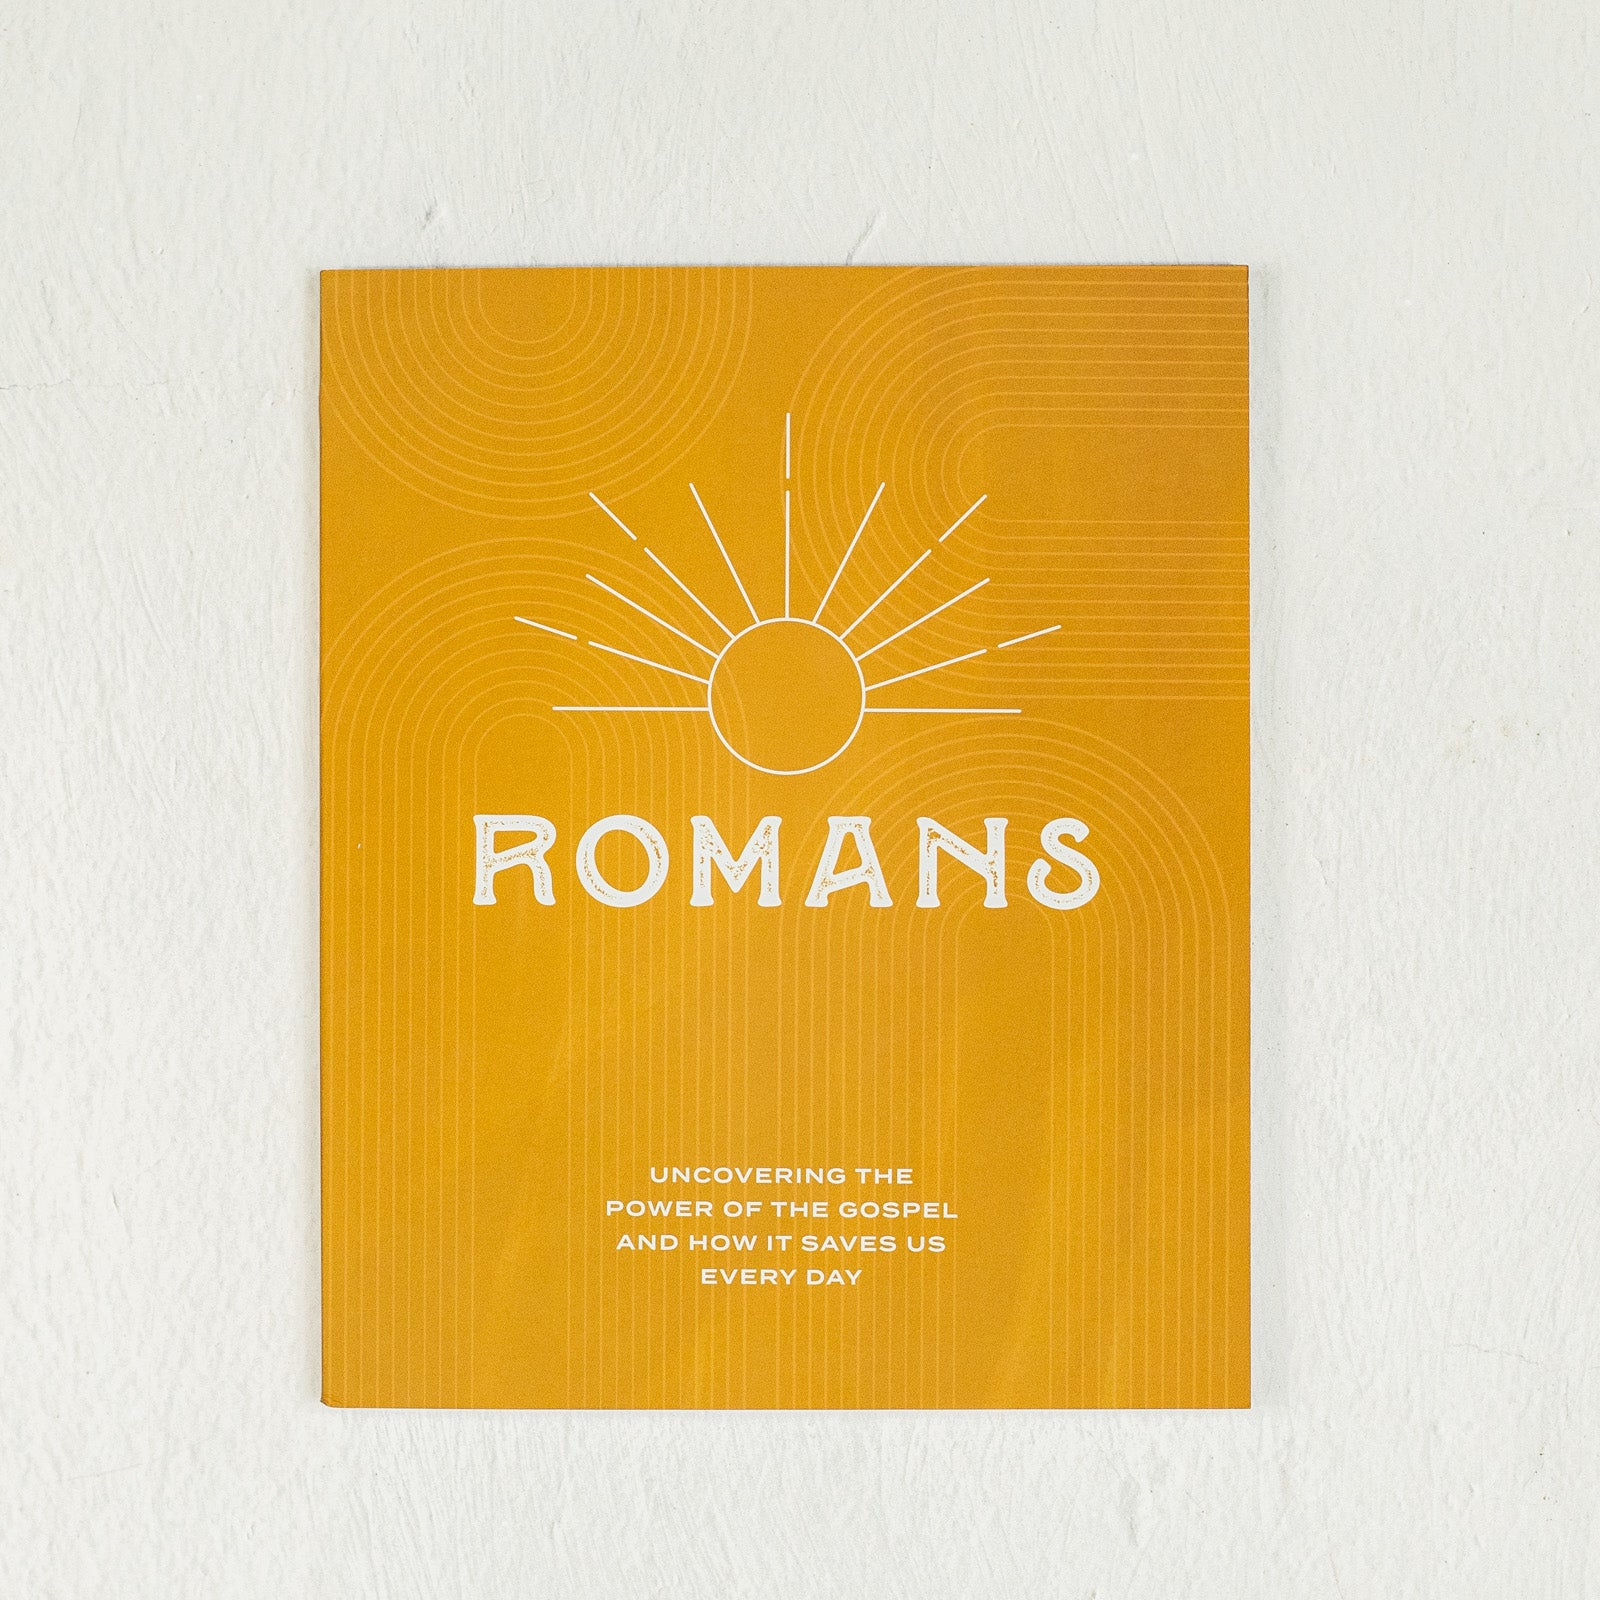 Romans: Uncovering the Power of the Gospel and How It Saves Us Every Day